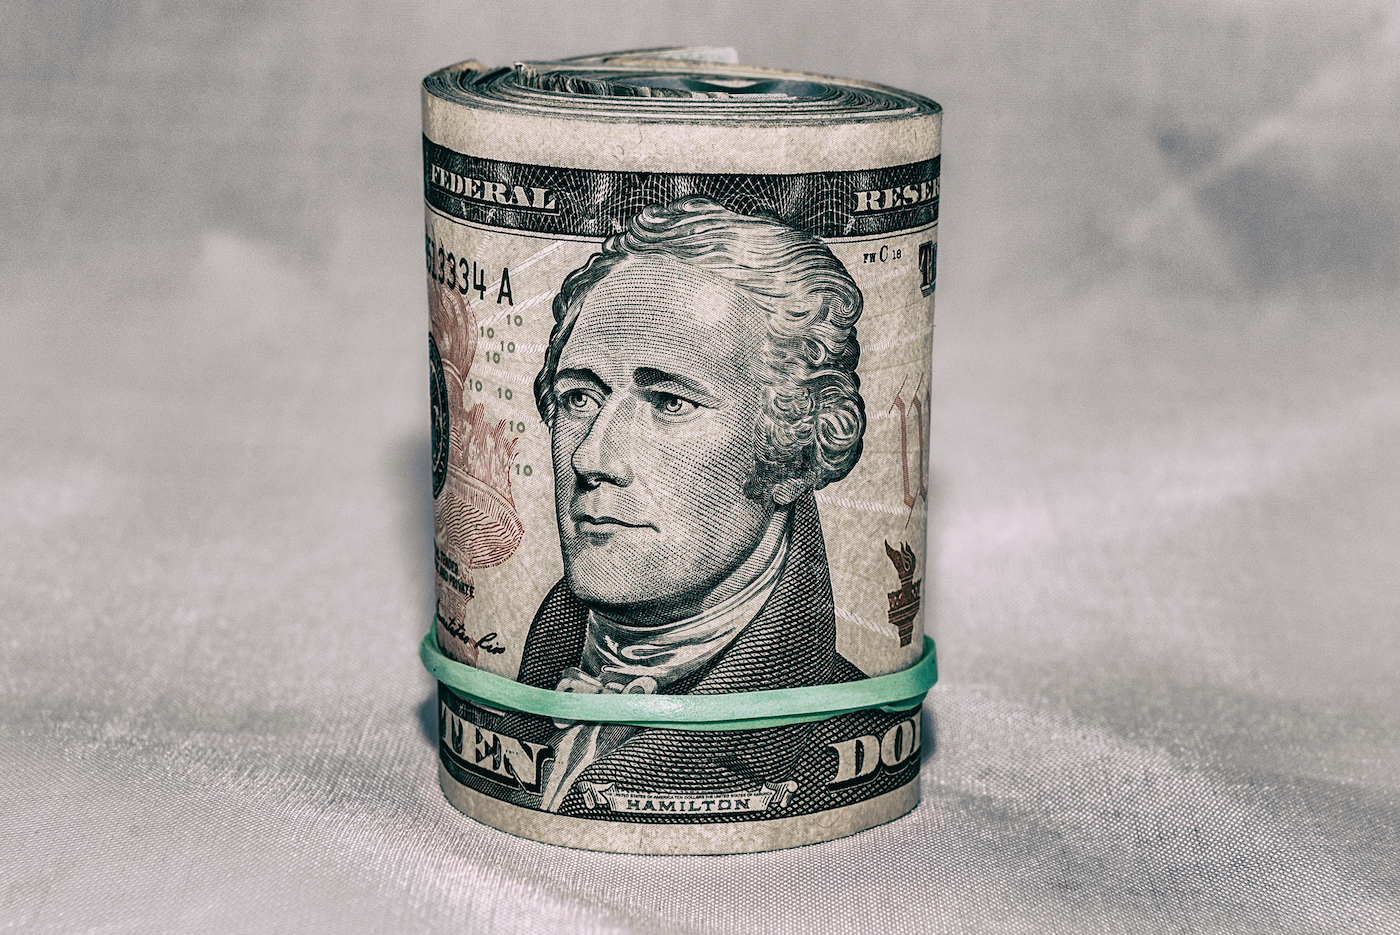 A roll of US currency with a $10 bill on the outside, Alexander Hamilton's portrait in the center.